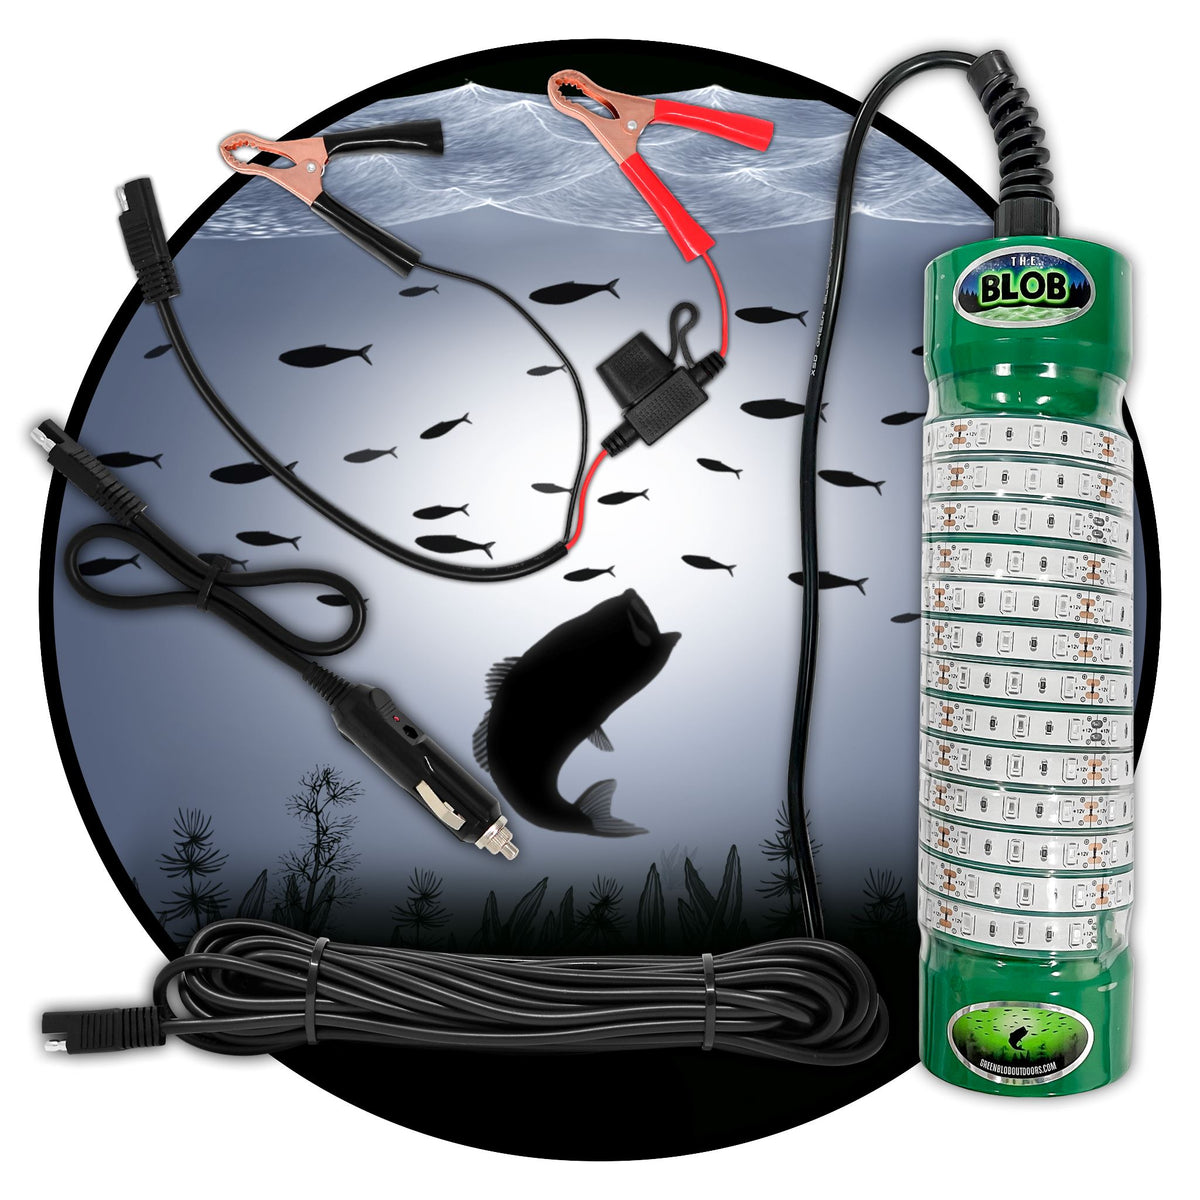 Build Your Blob Underwater Fishing Light at Green Blob Outdoors